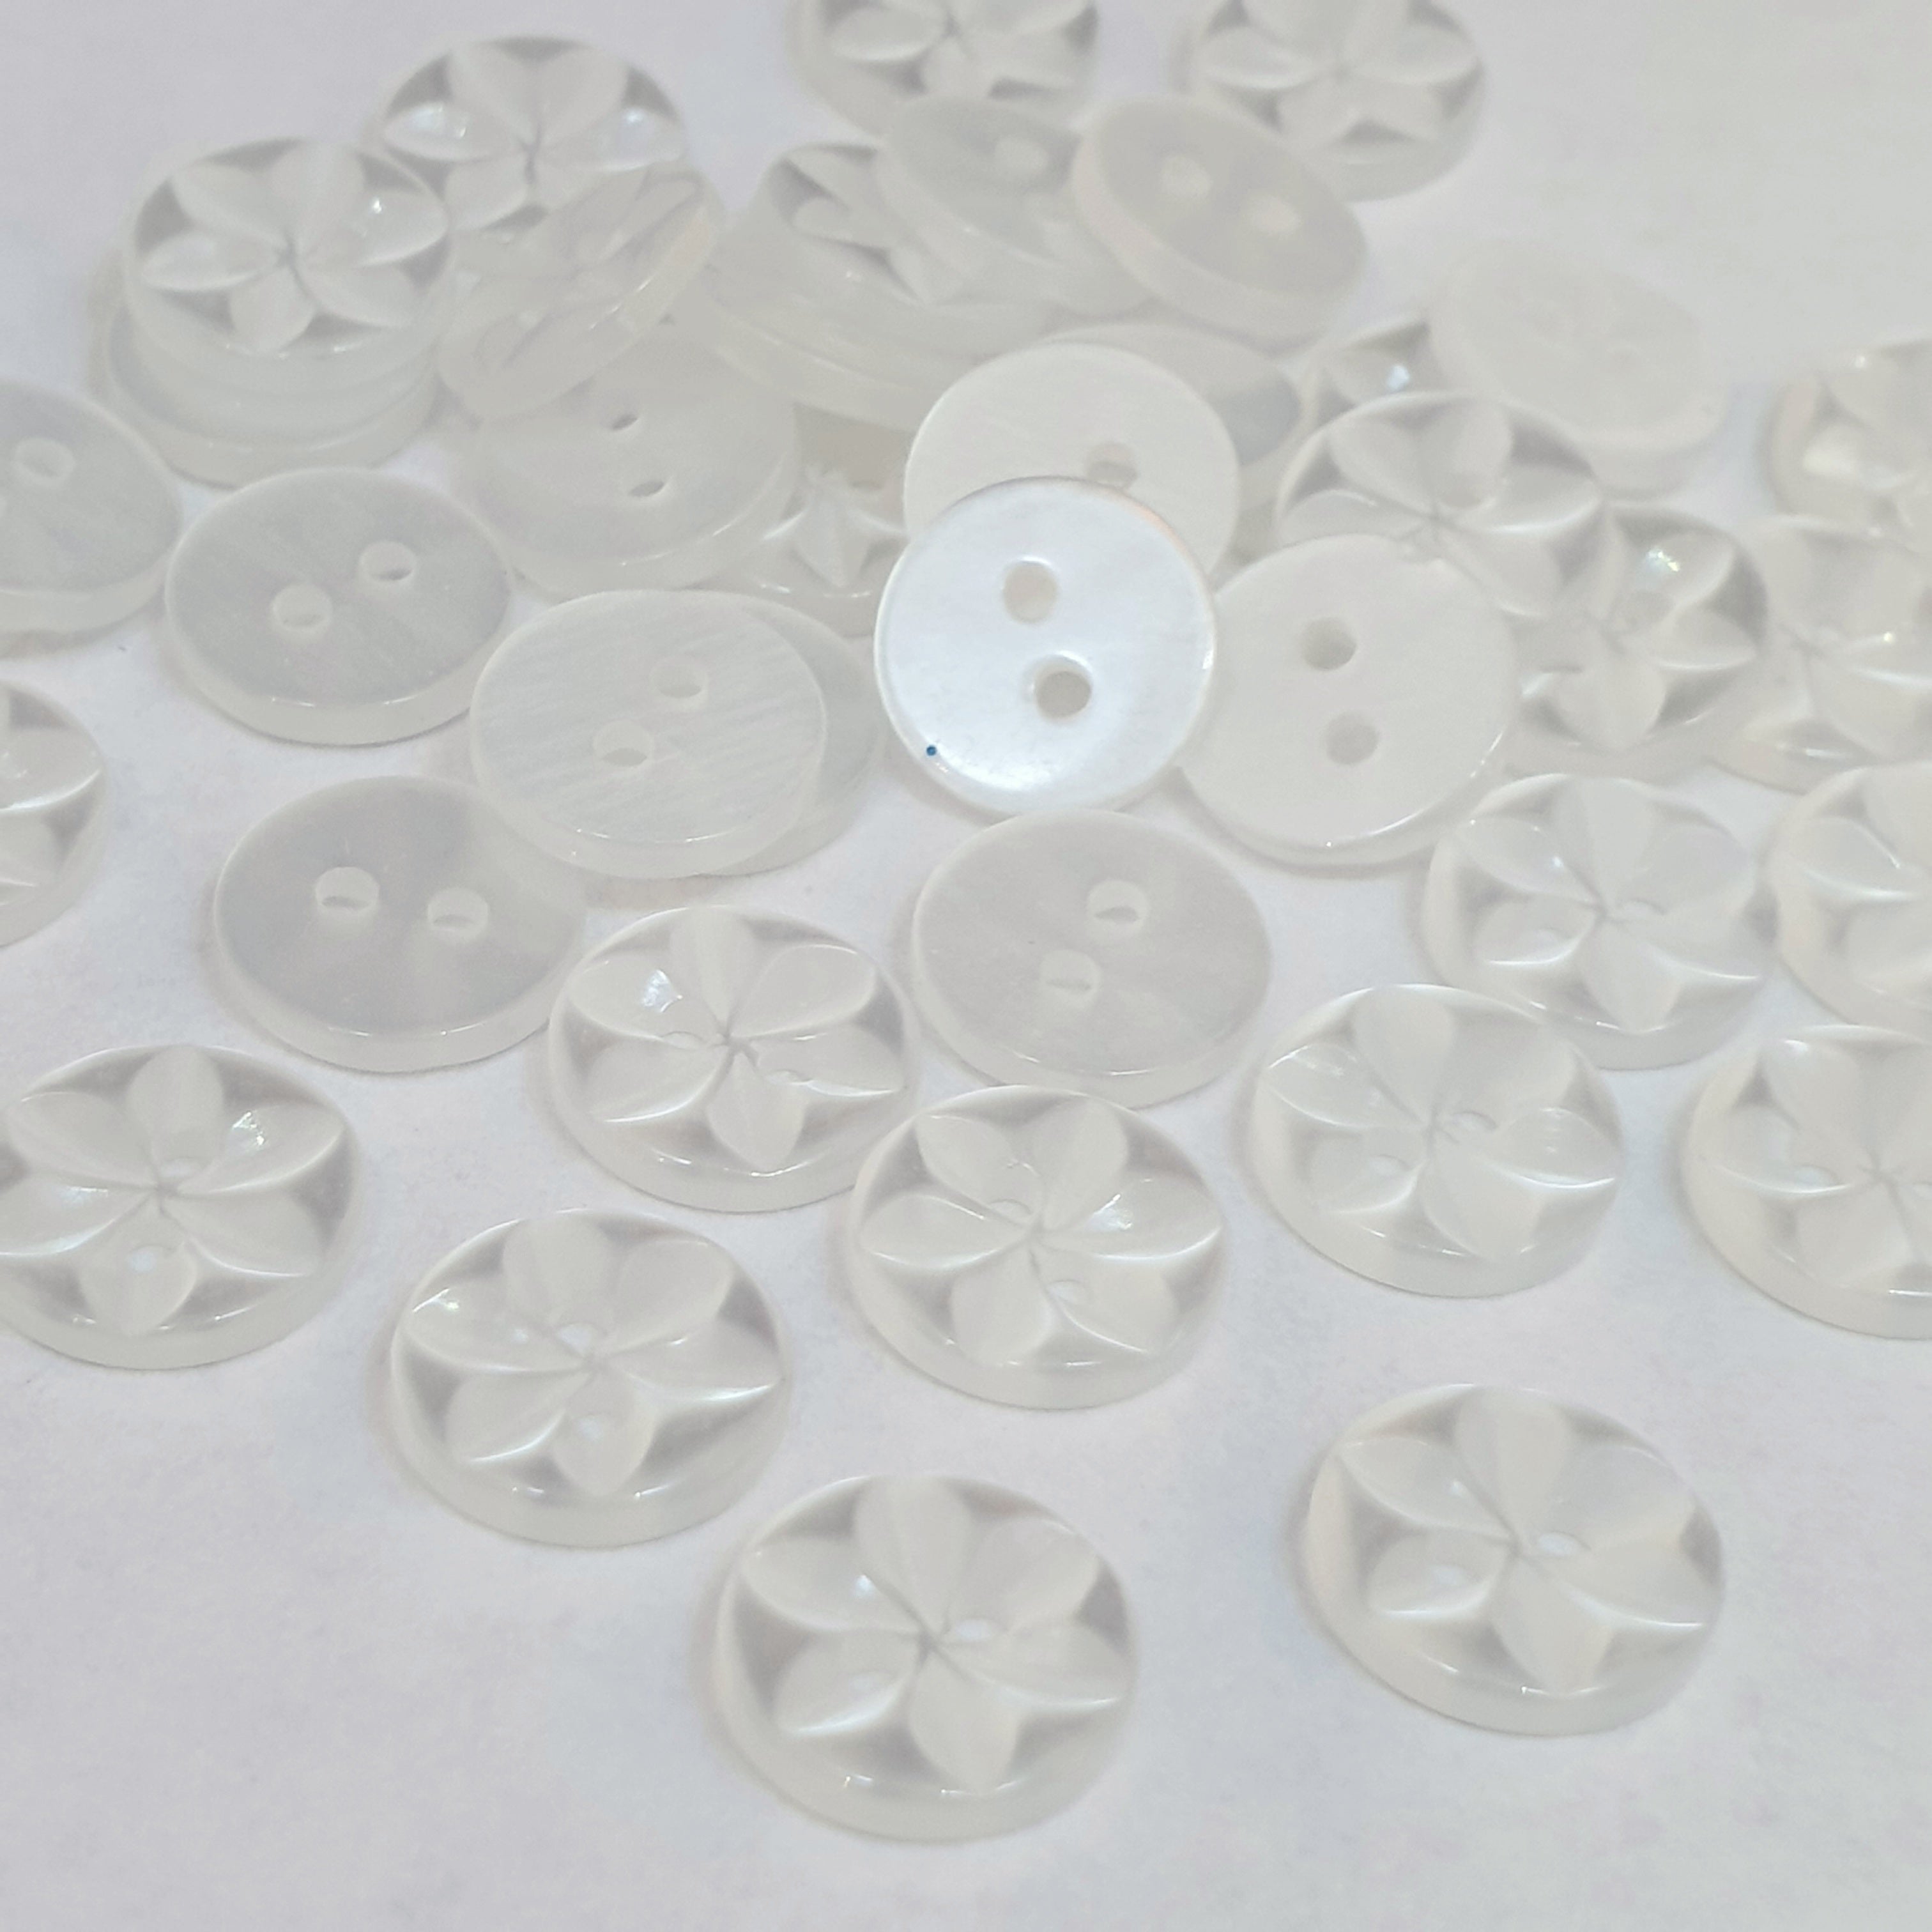 MajorCrafts 40pcs 11mm Pearlescent White Flower 2 Holes Small Round Resin Sewing Buttons